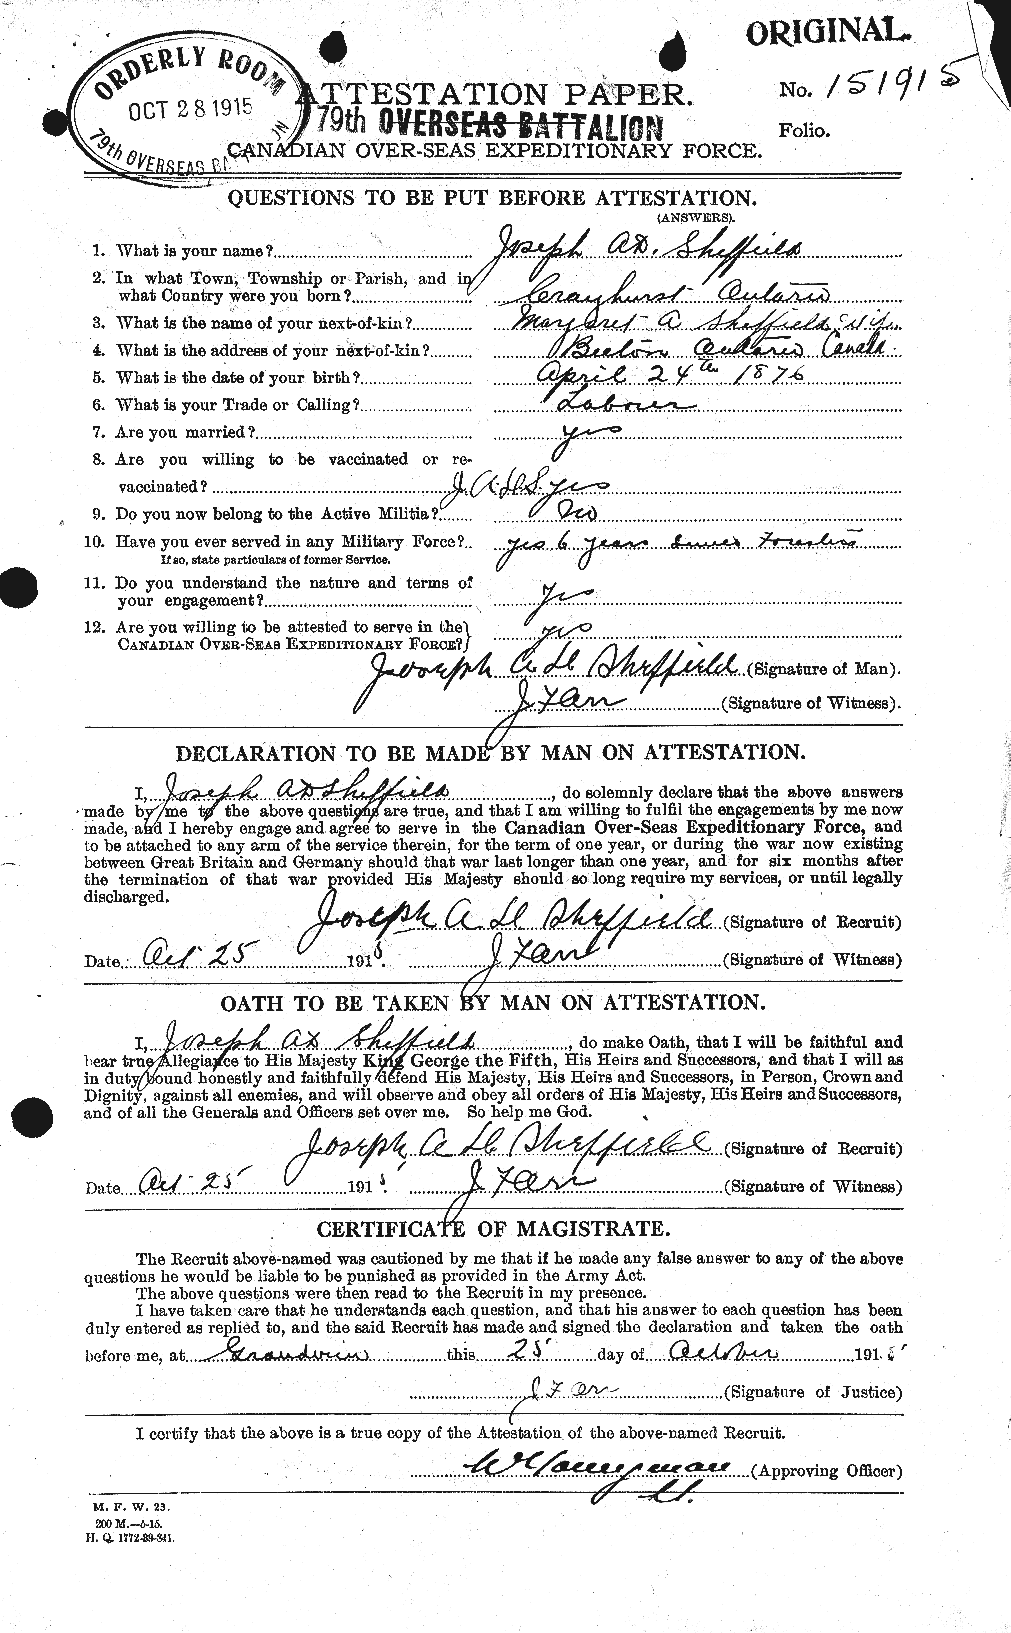 Personnel Records of the First World War - CEF 090390a